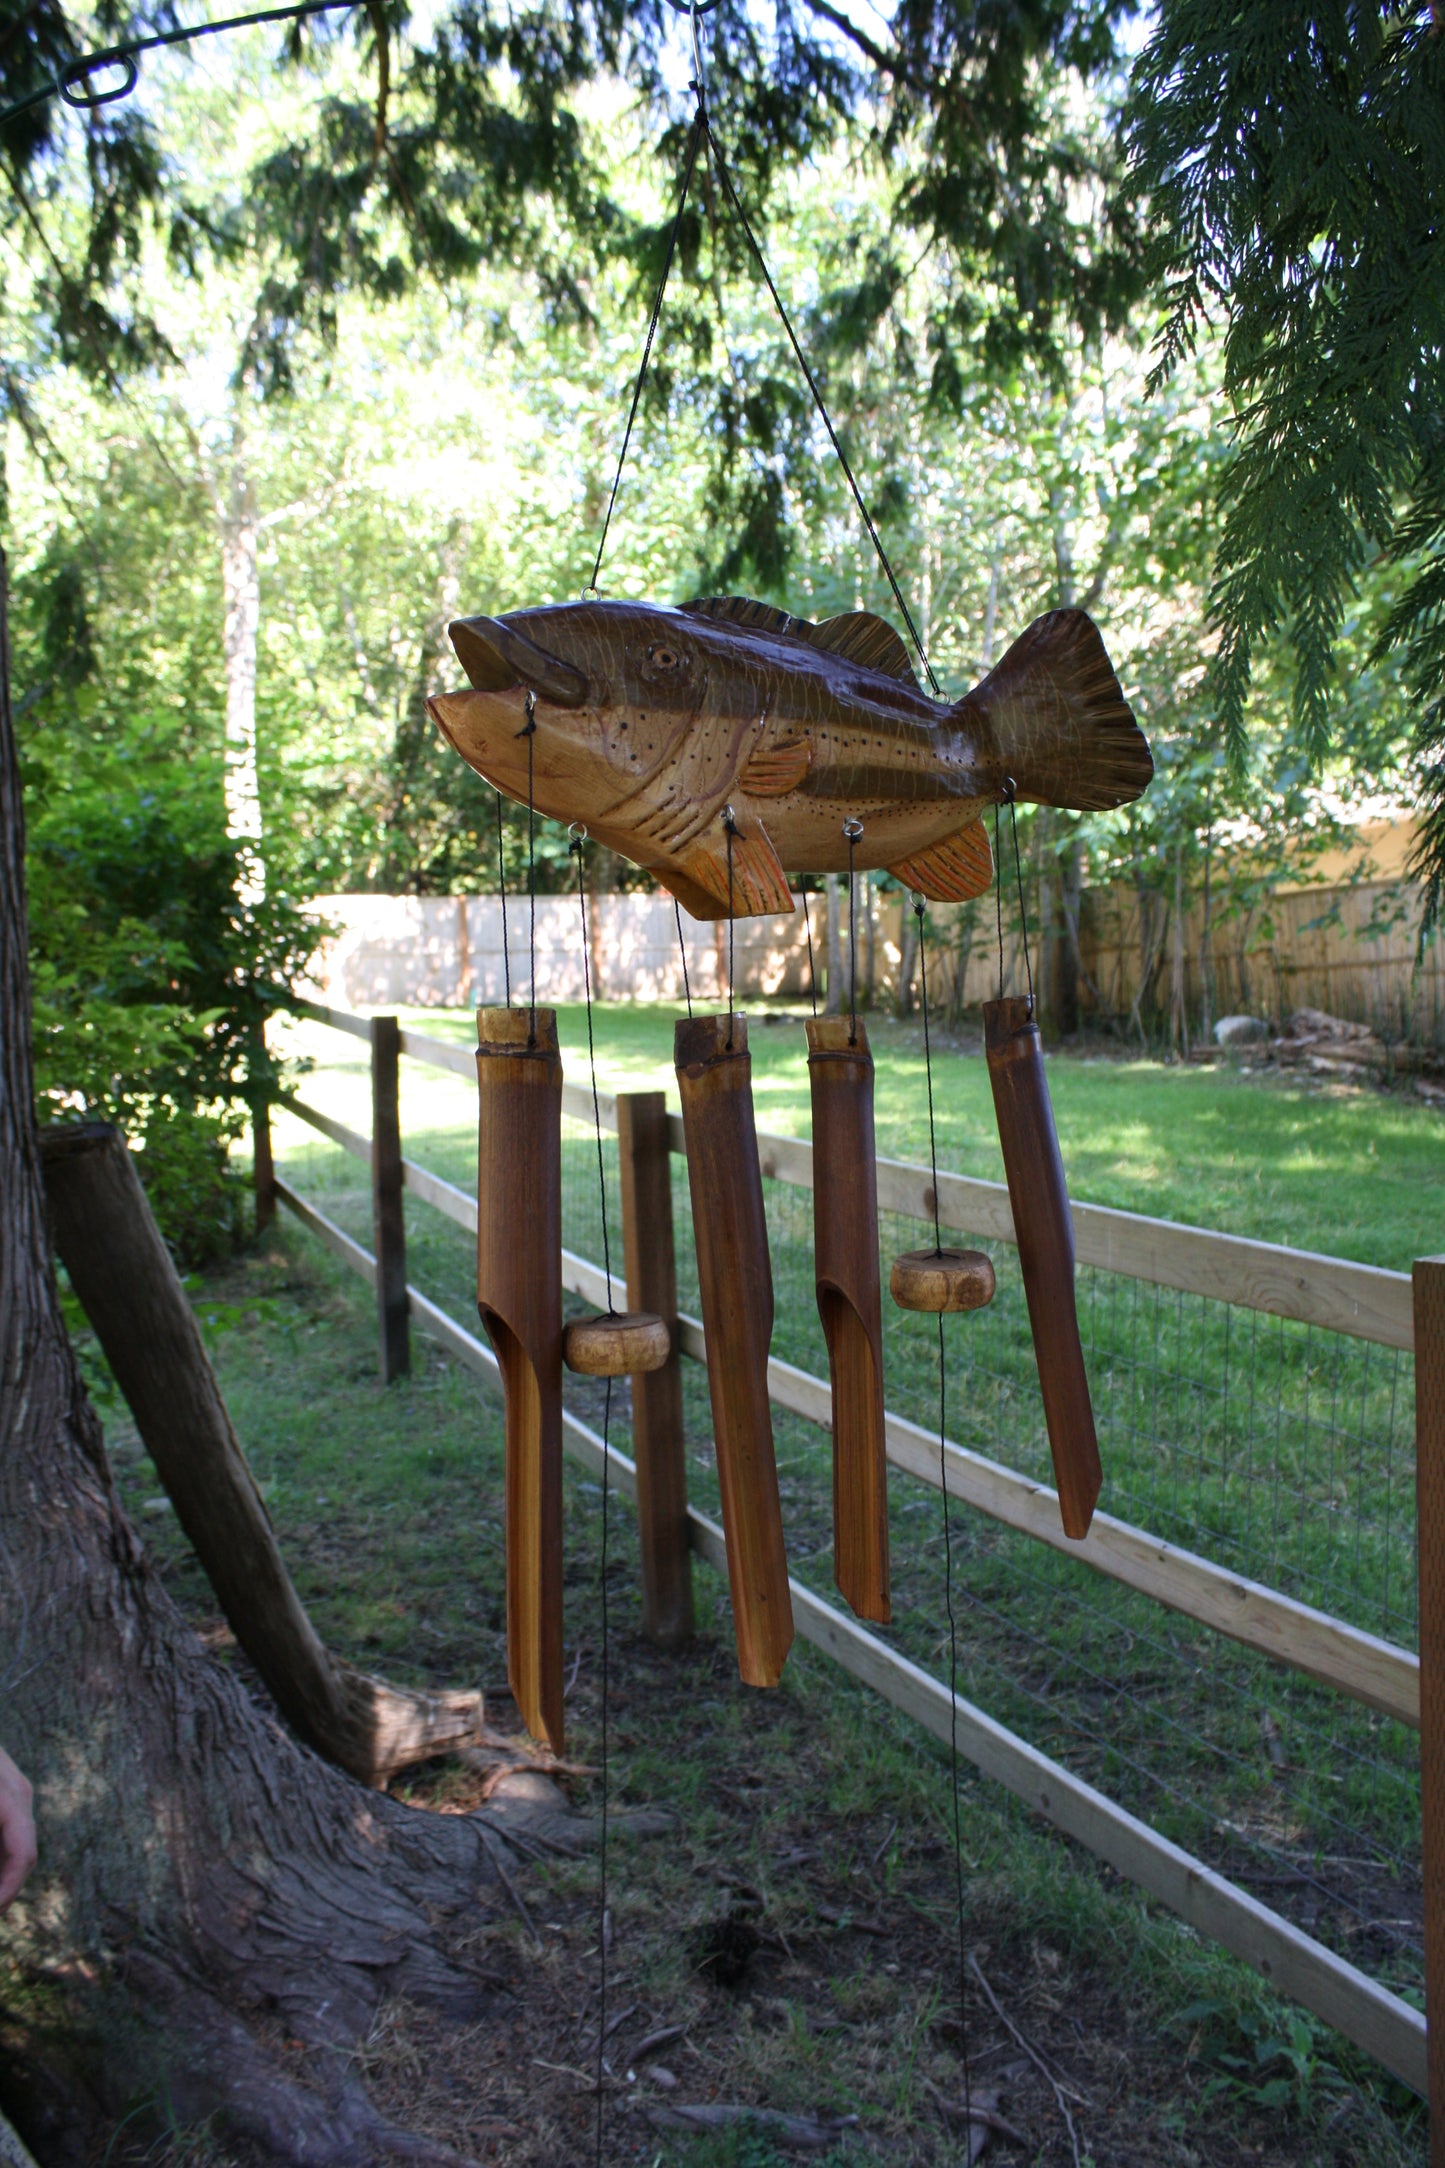 Big Mouth Bass Bamboo Wind Chime